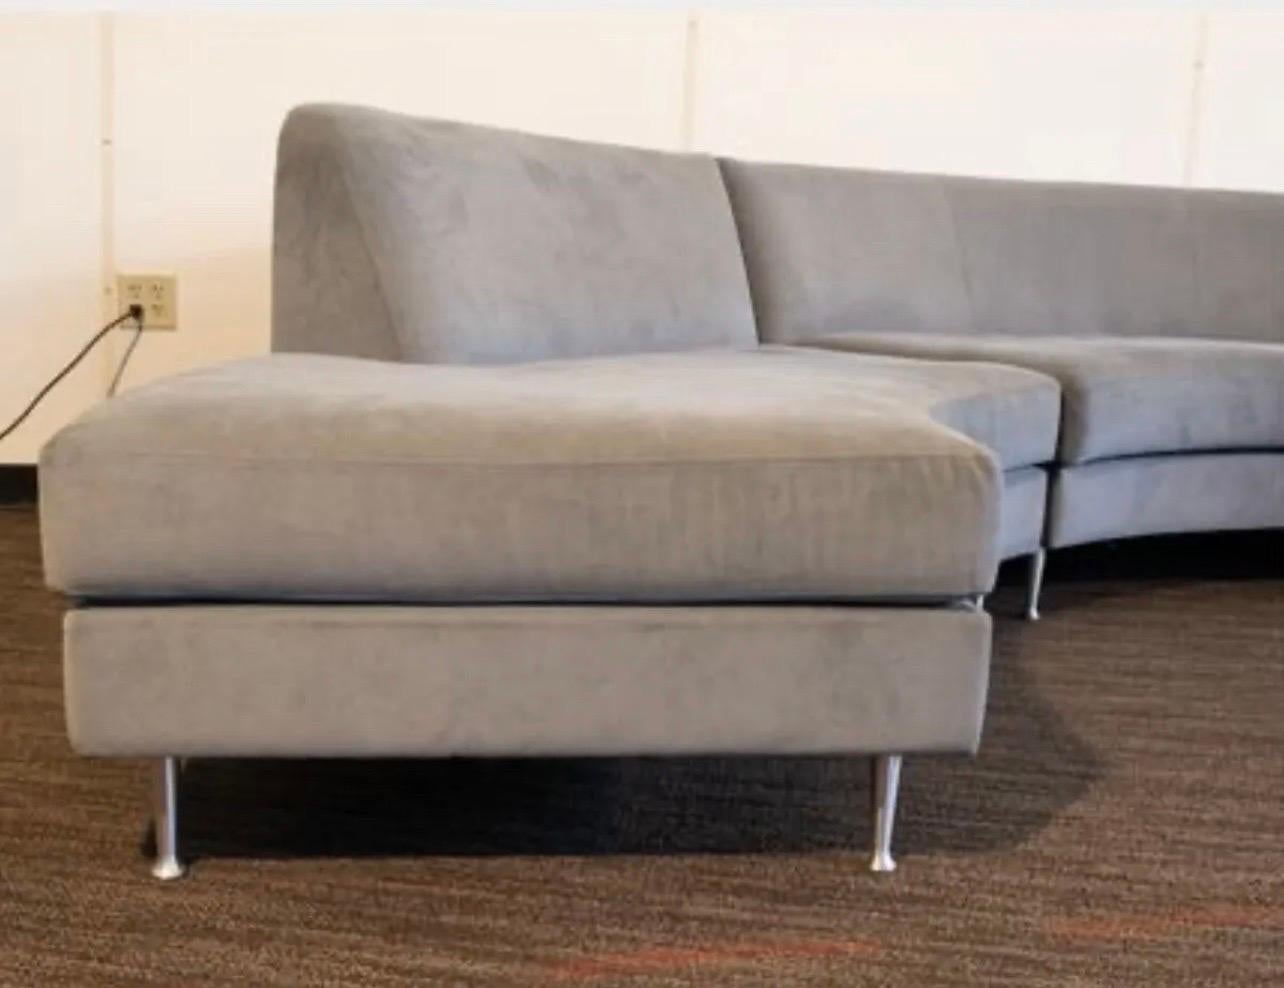 Contemporary Menlo Park sectional sofa designed by Rick Lee for American Leather Furniture.  All makers hallmarks are present, see pics. Features luxurious top of the line stitched solid gray suede upholstery and shaped aluminum legs. It is